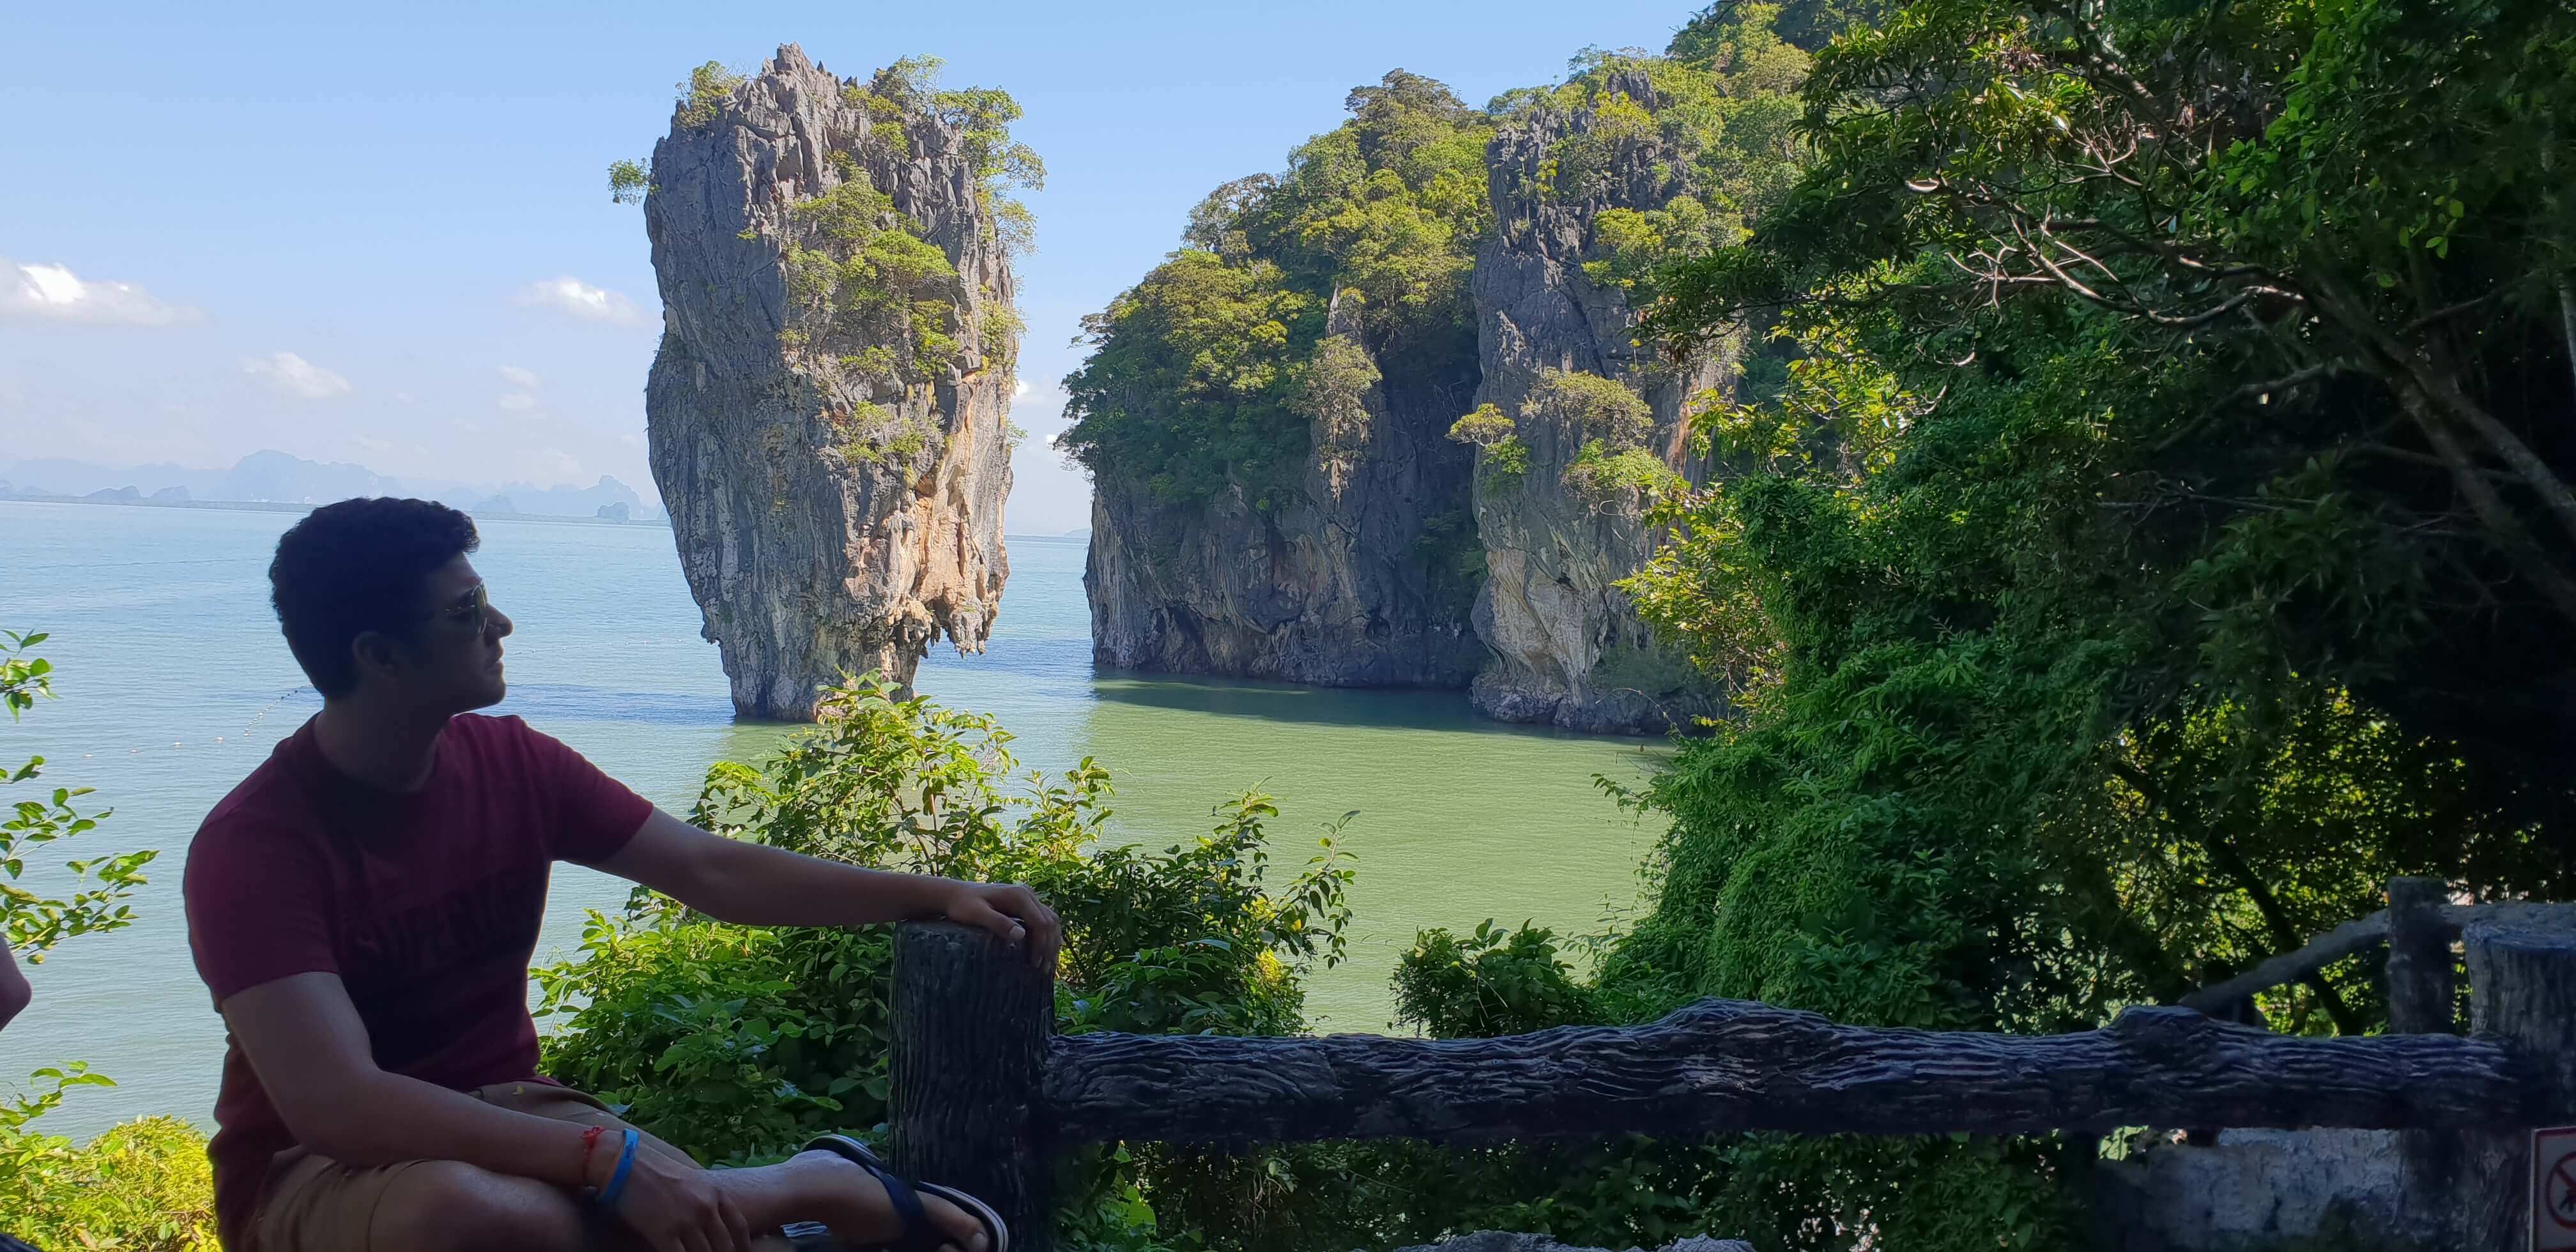 The scenic Khao Phing Kan also known as James Bond island